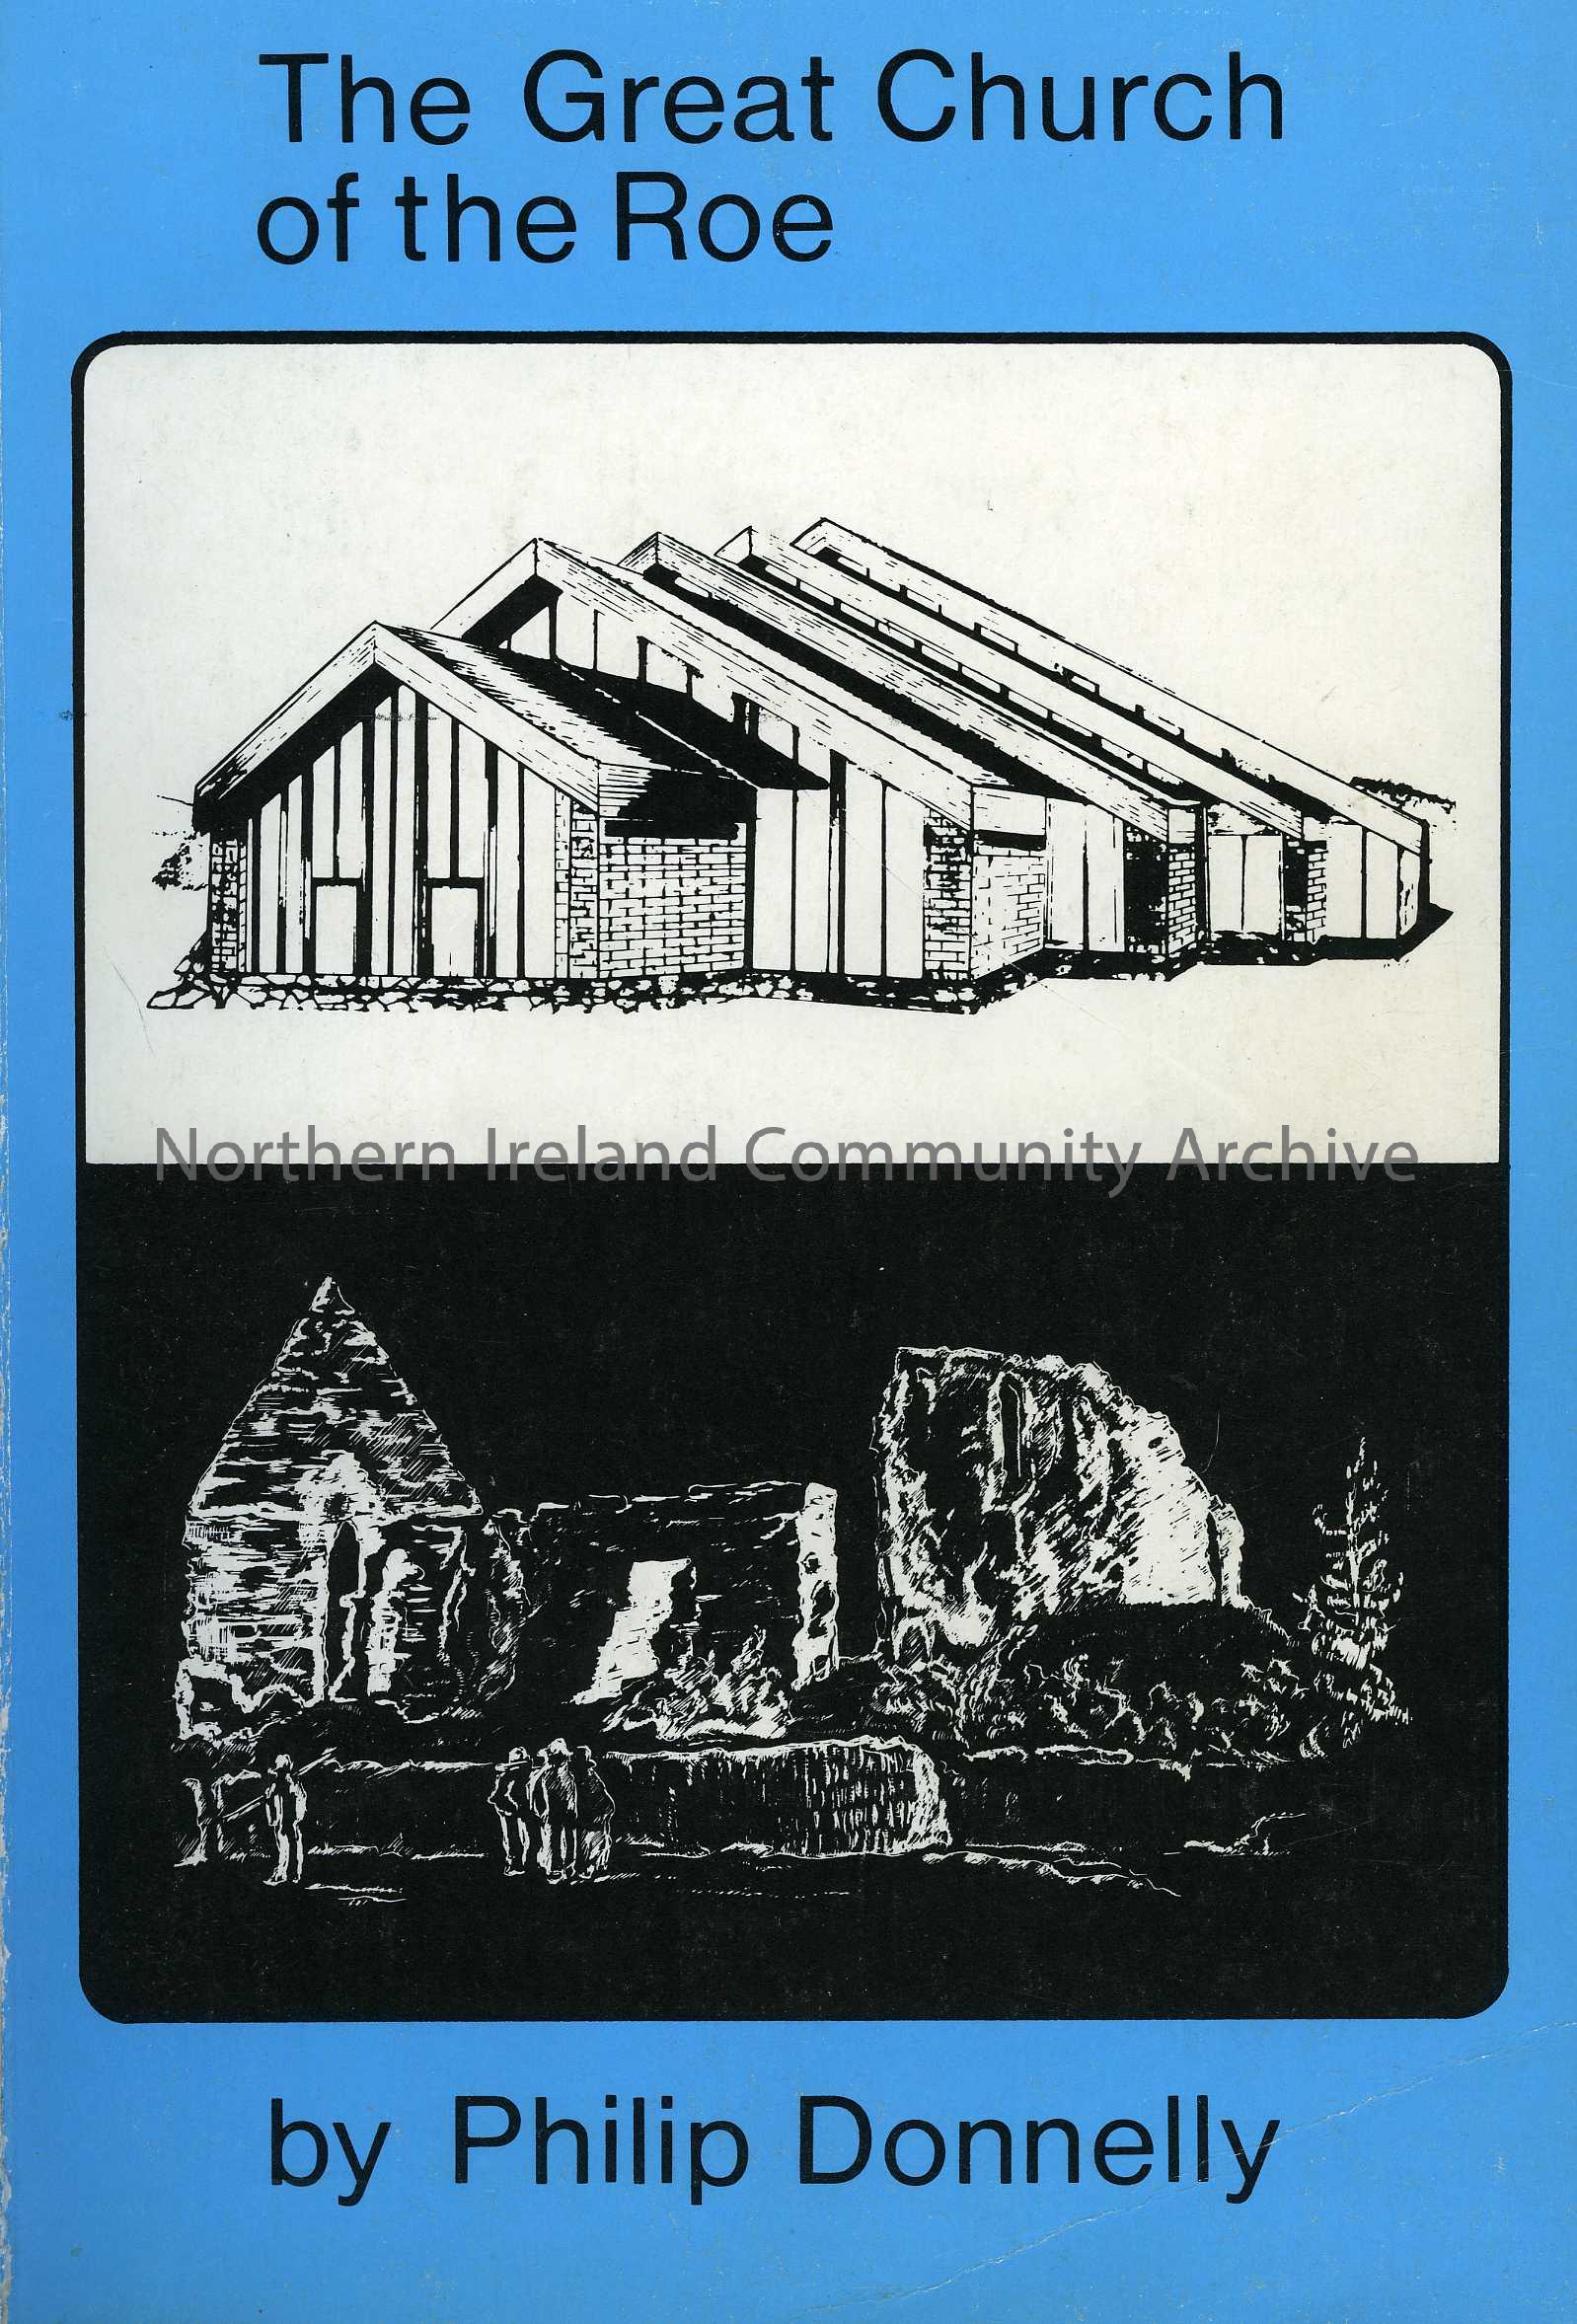 book titled, The Great Church of the Roe. By Philip Donnelly (1939)